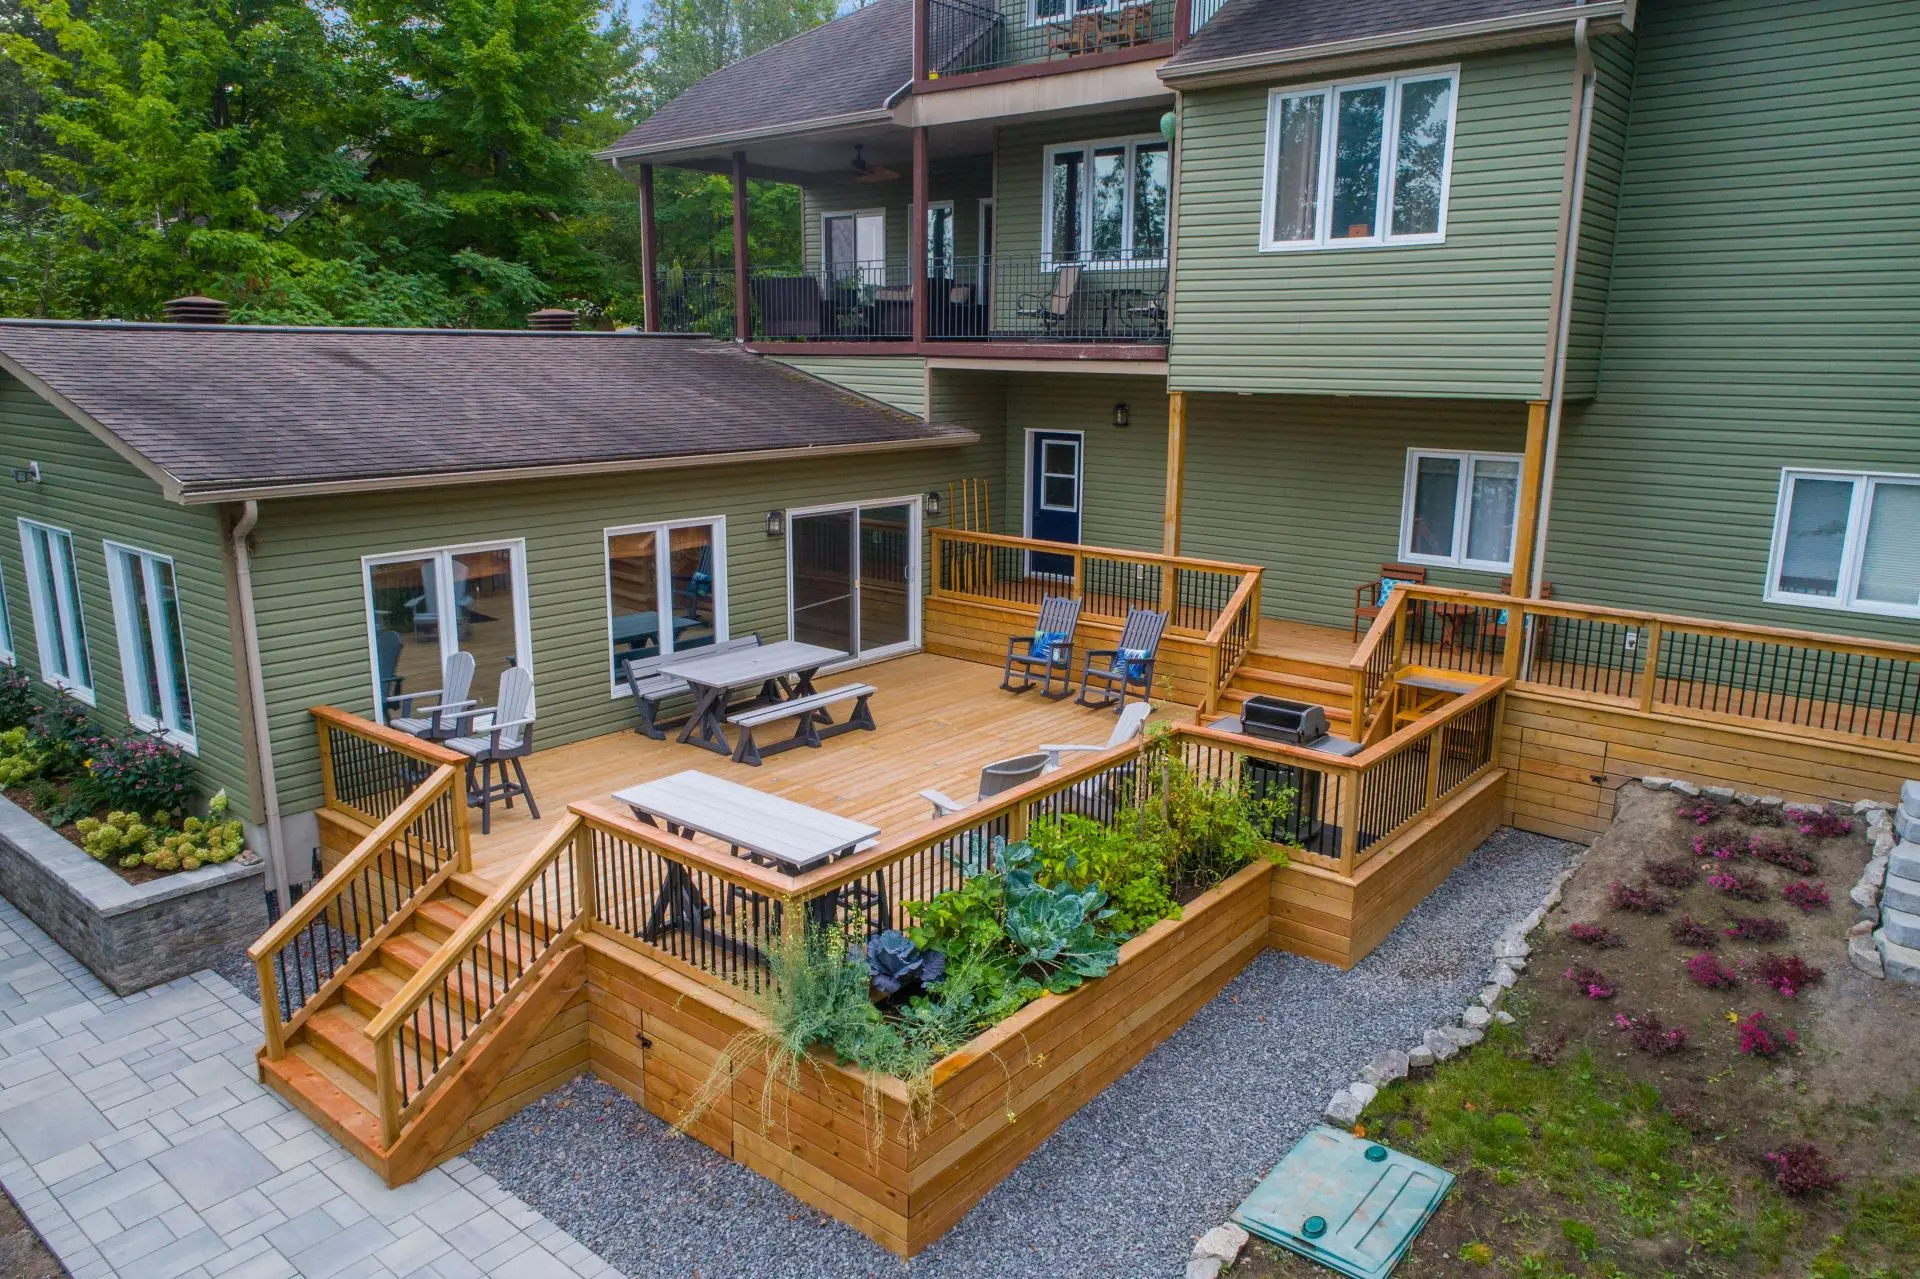 Kickstart patio season with these tips for home improvement